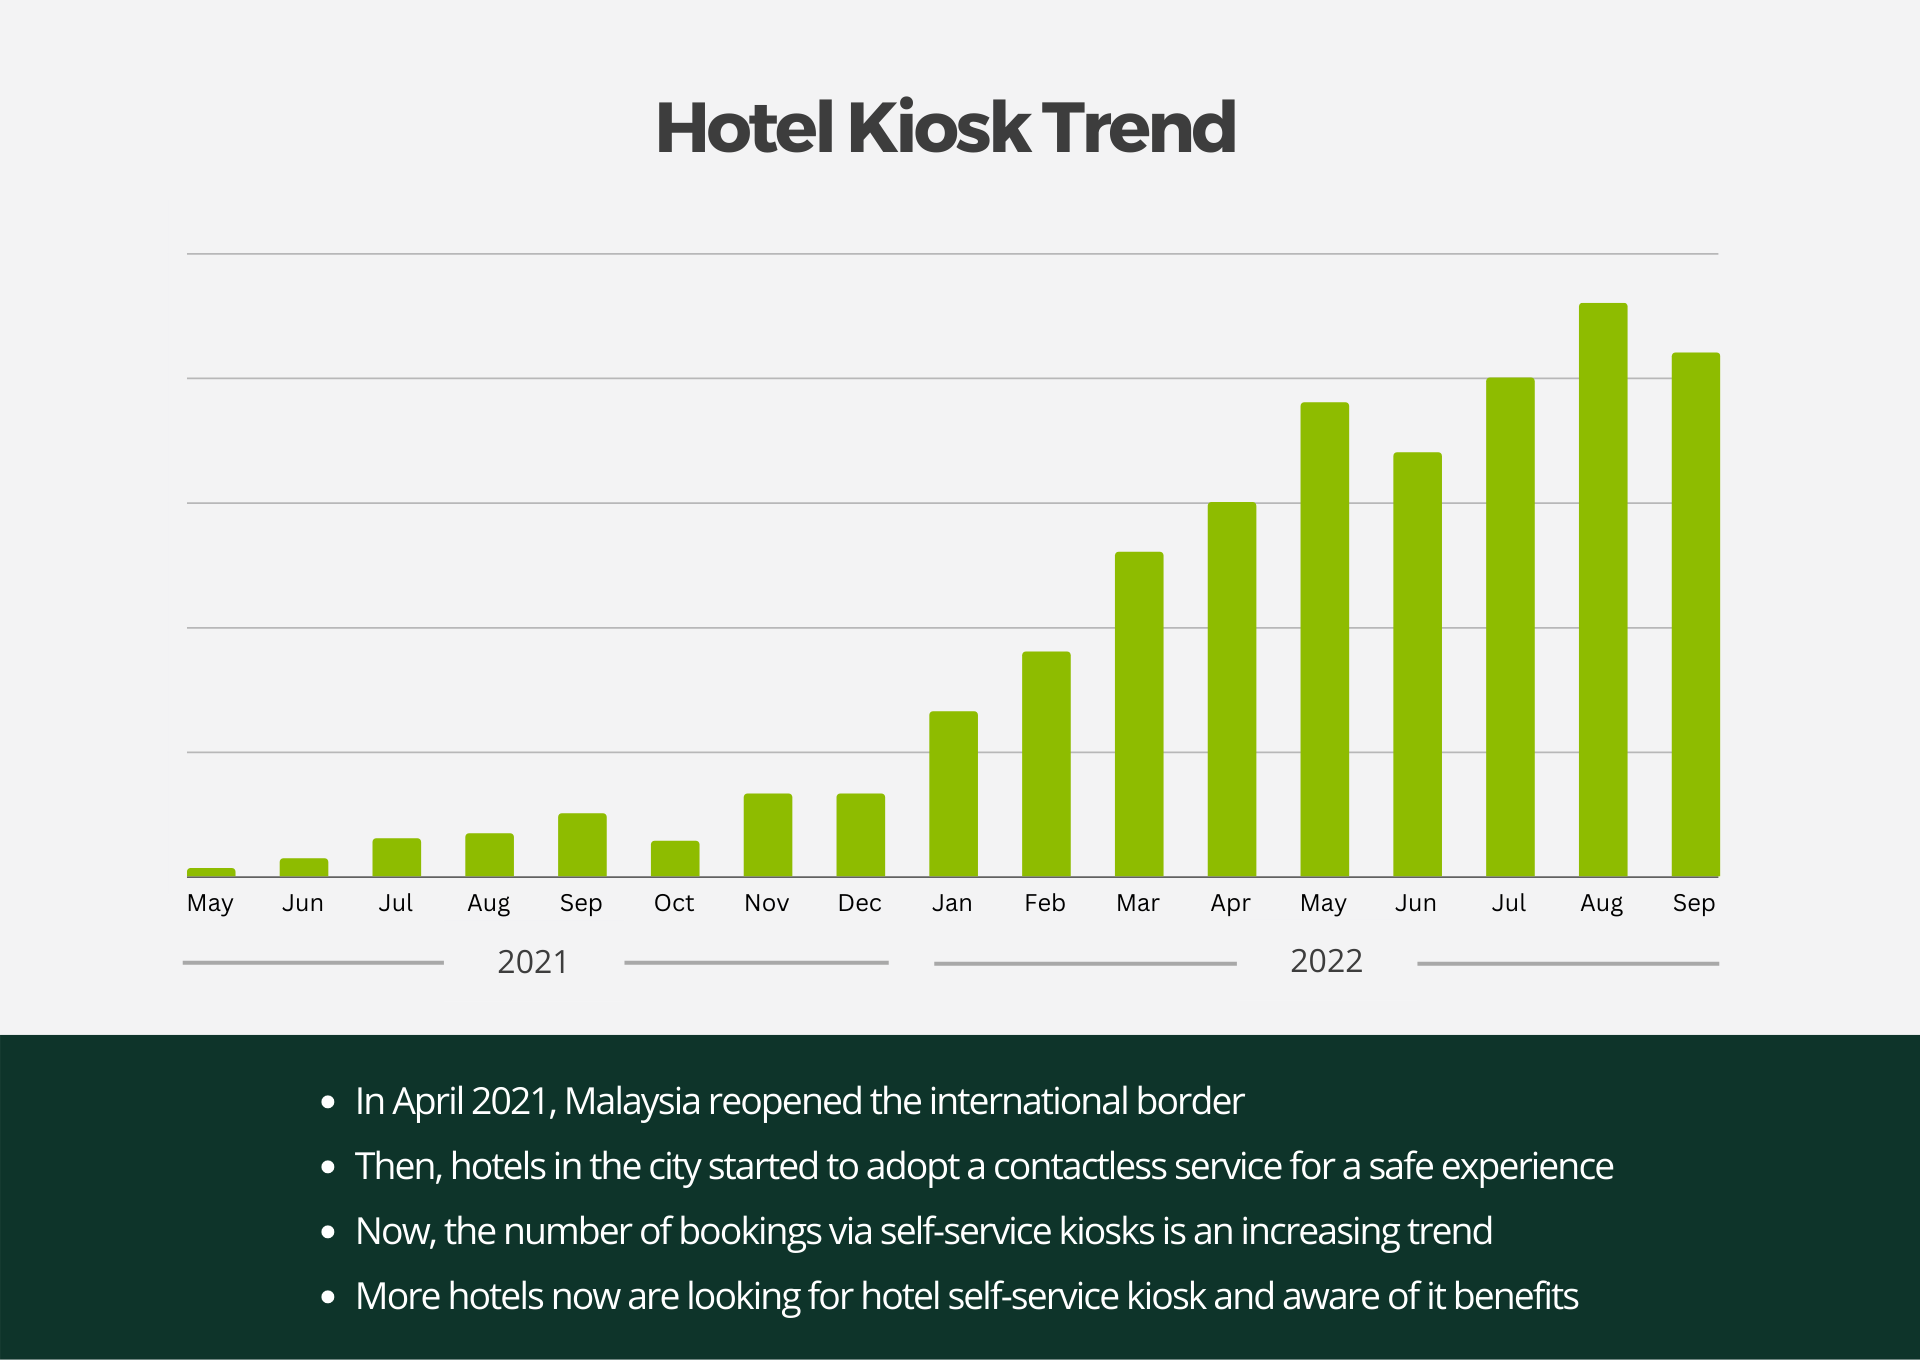 Hotel Kiosk Trend and Demand